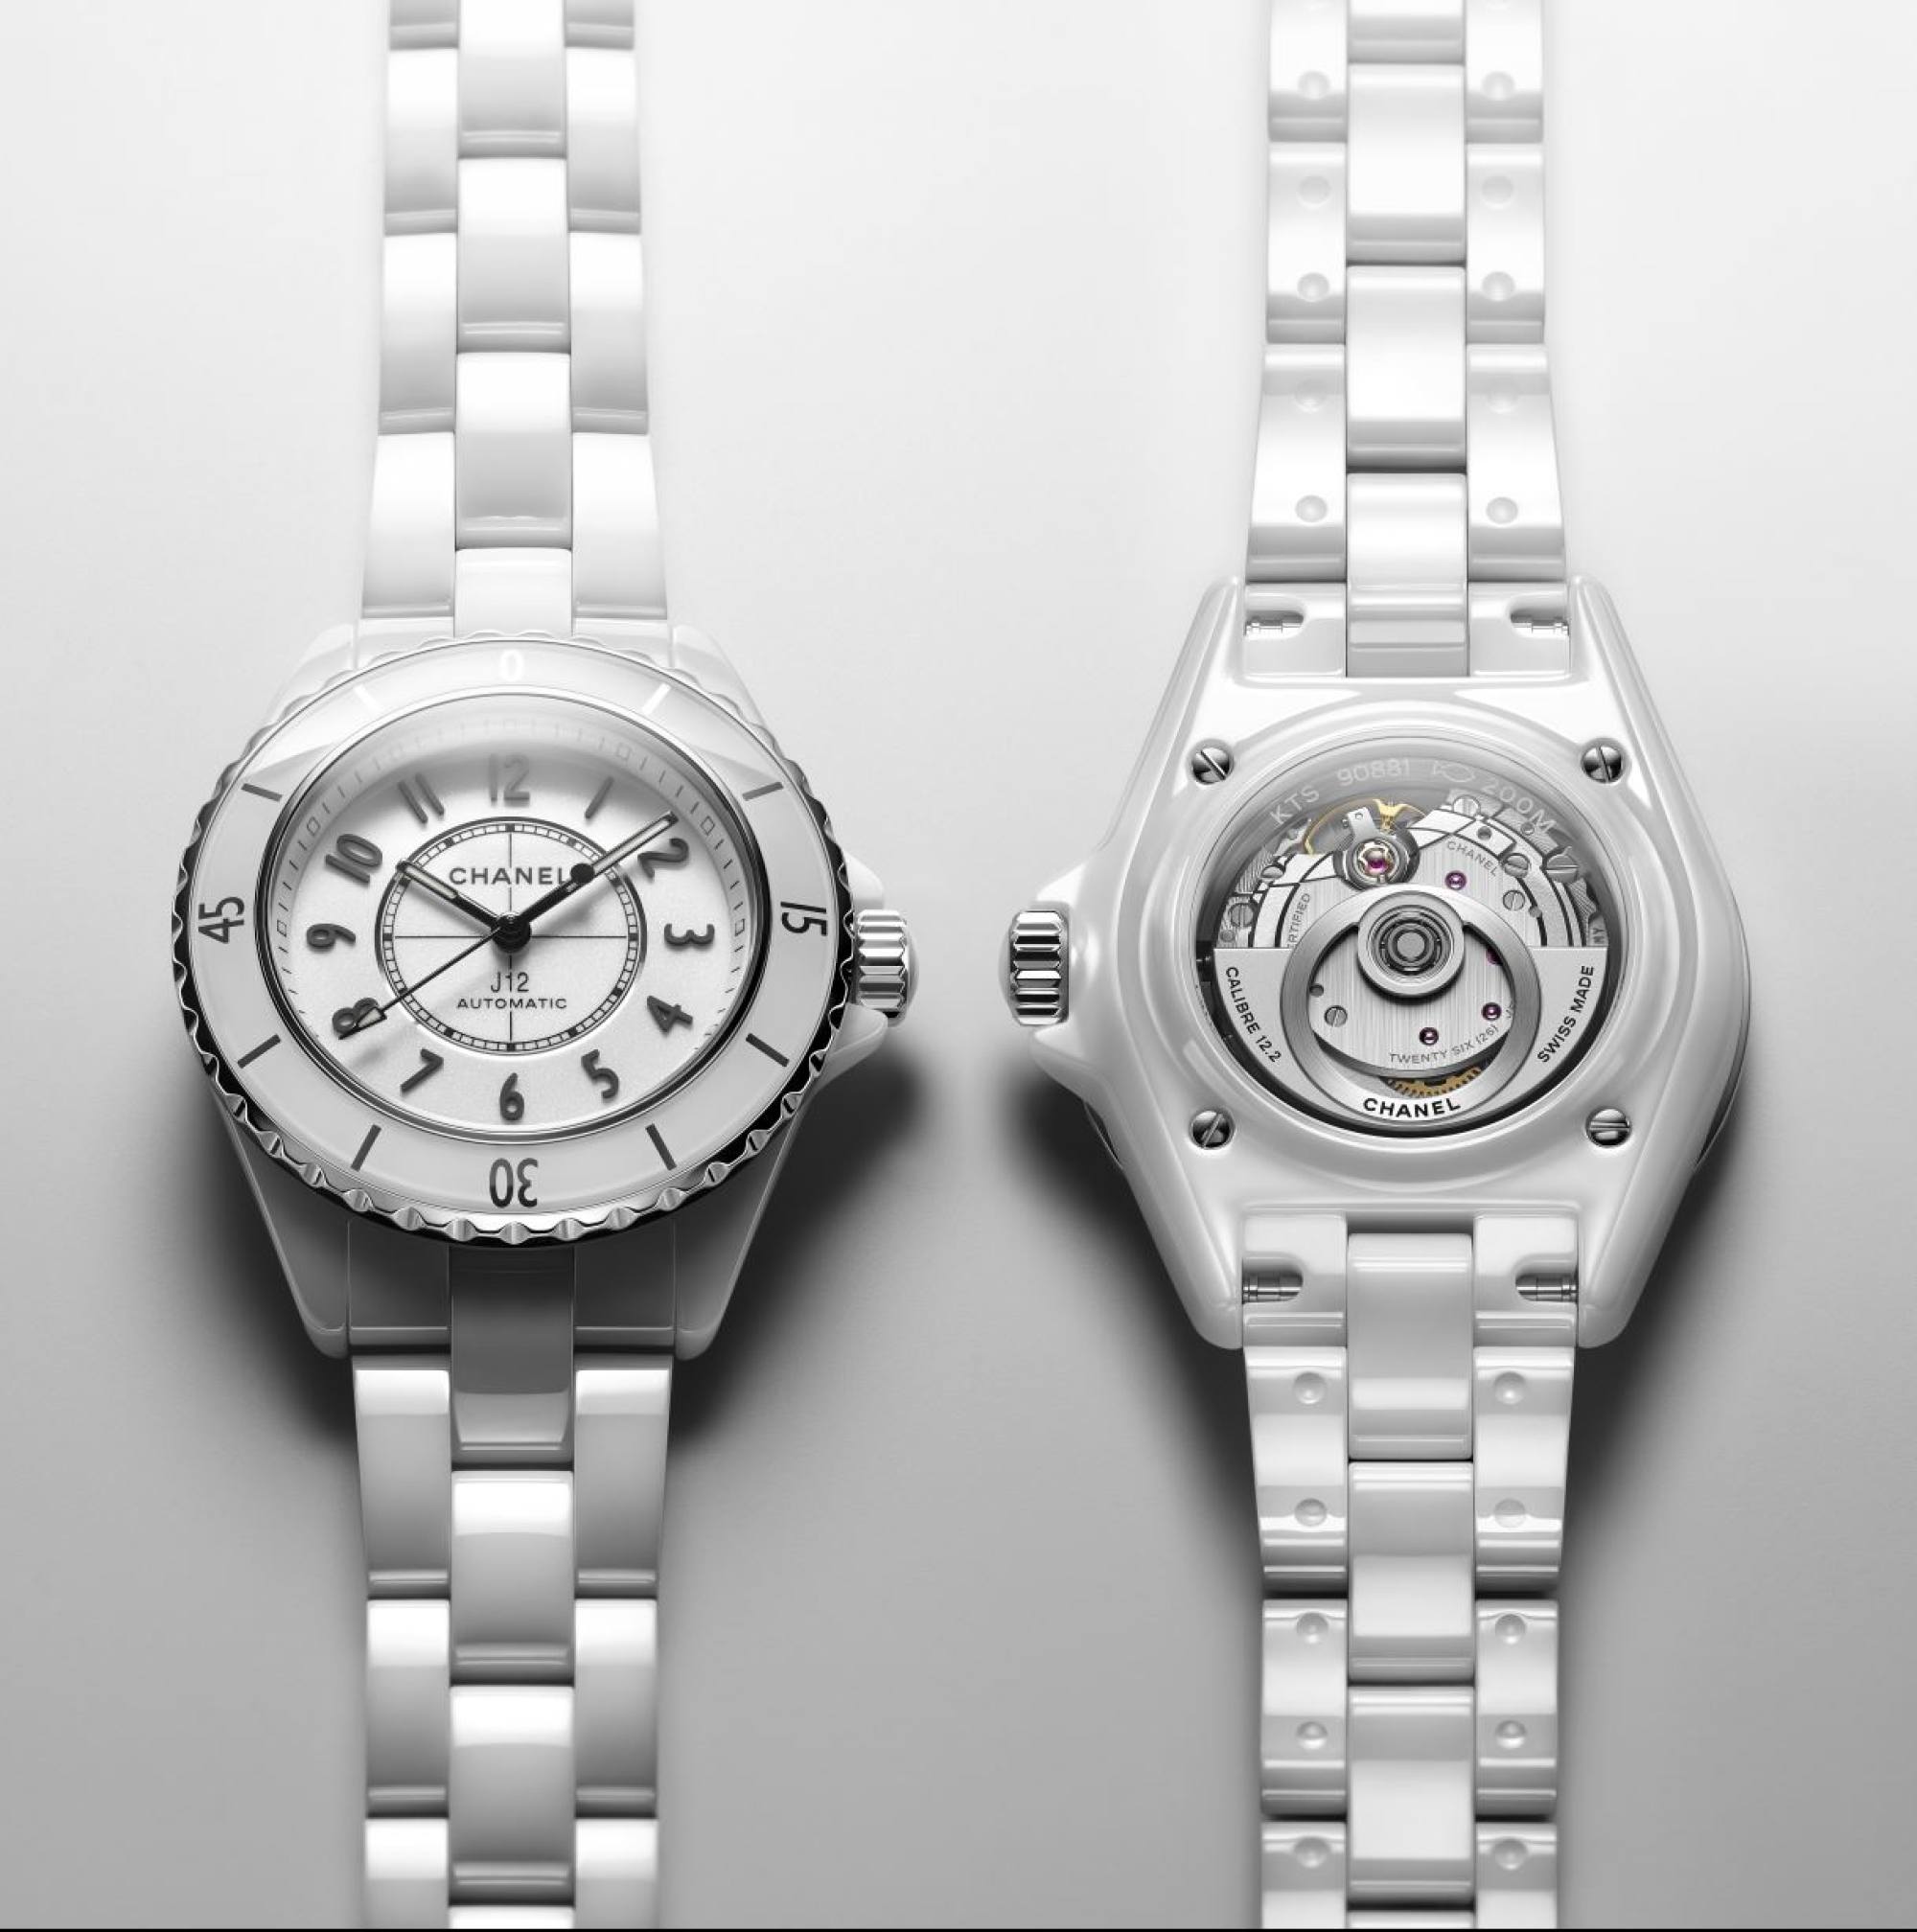 On Her Watch: 6 biggest decisions when choosing a timepiece – from